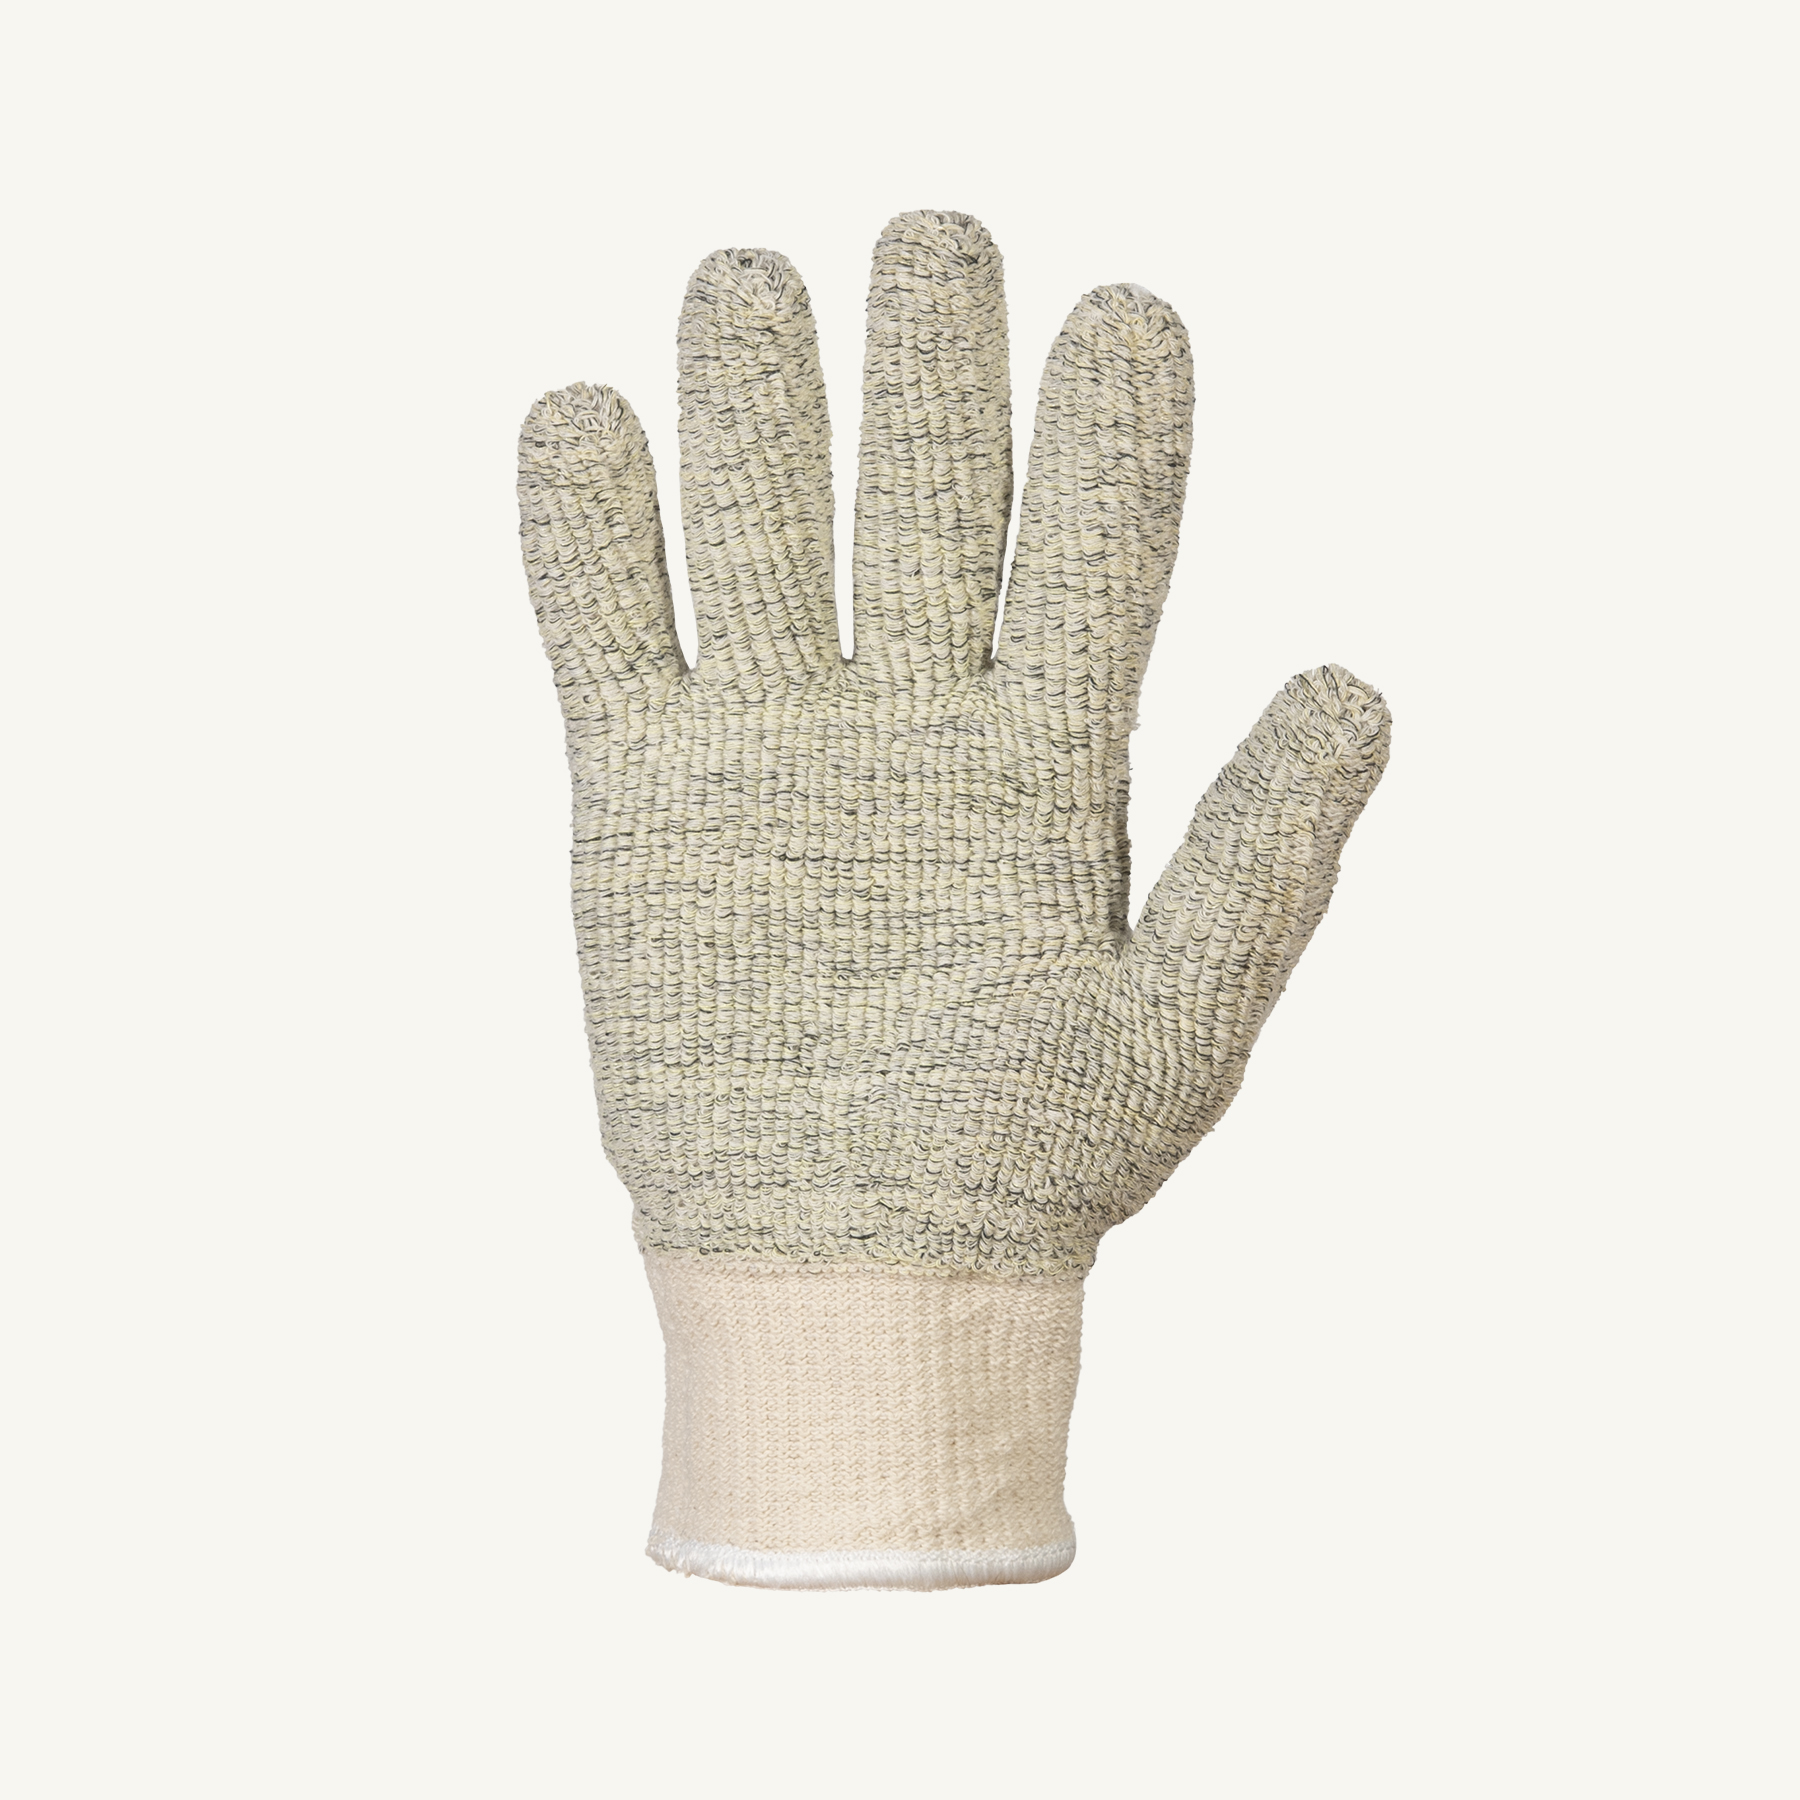 TCKVLO Superior® Contender™ Terry-Knit Cut Resistant Heat Safety Metal-Stamping Work Gloves